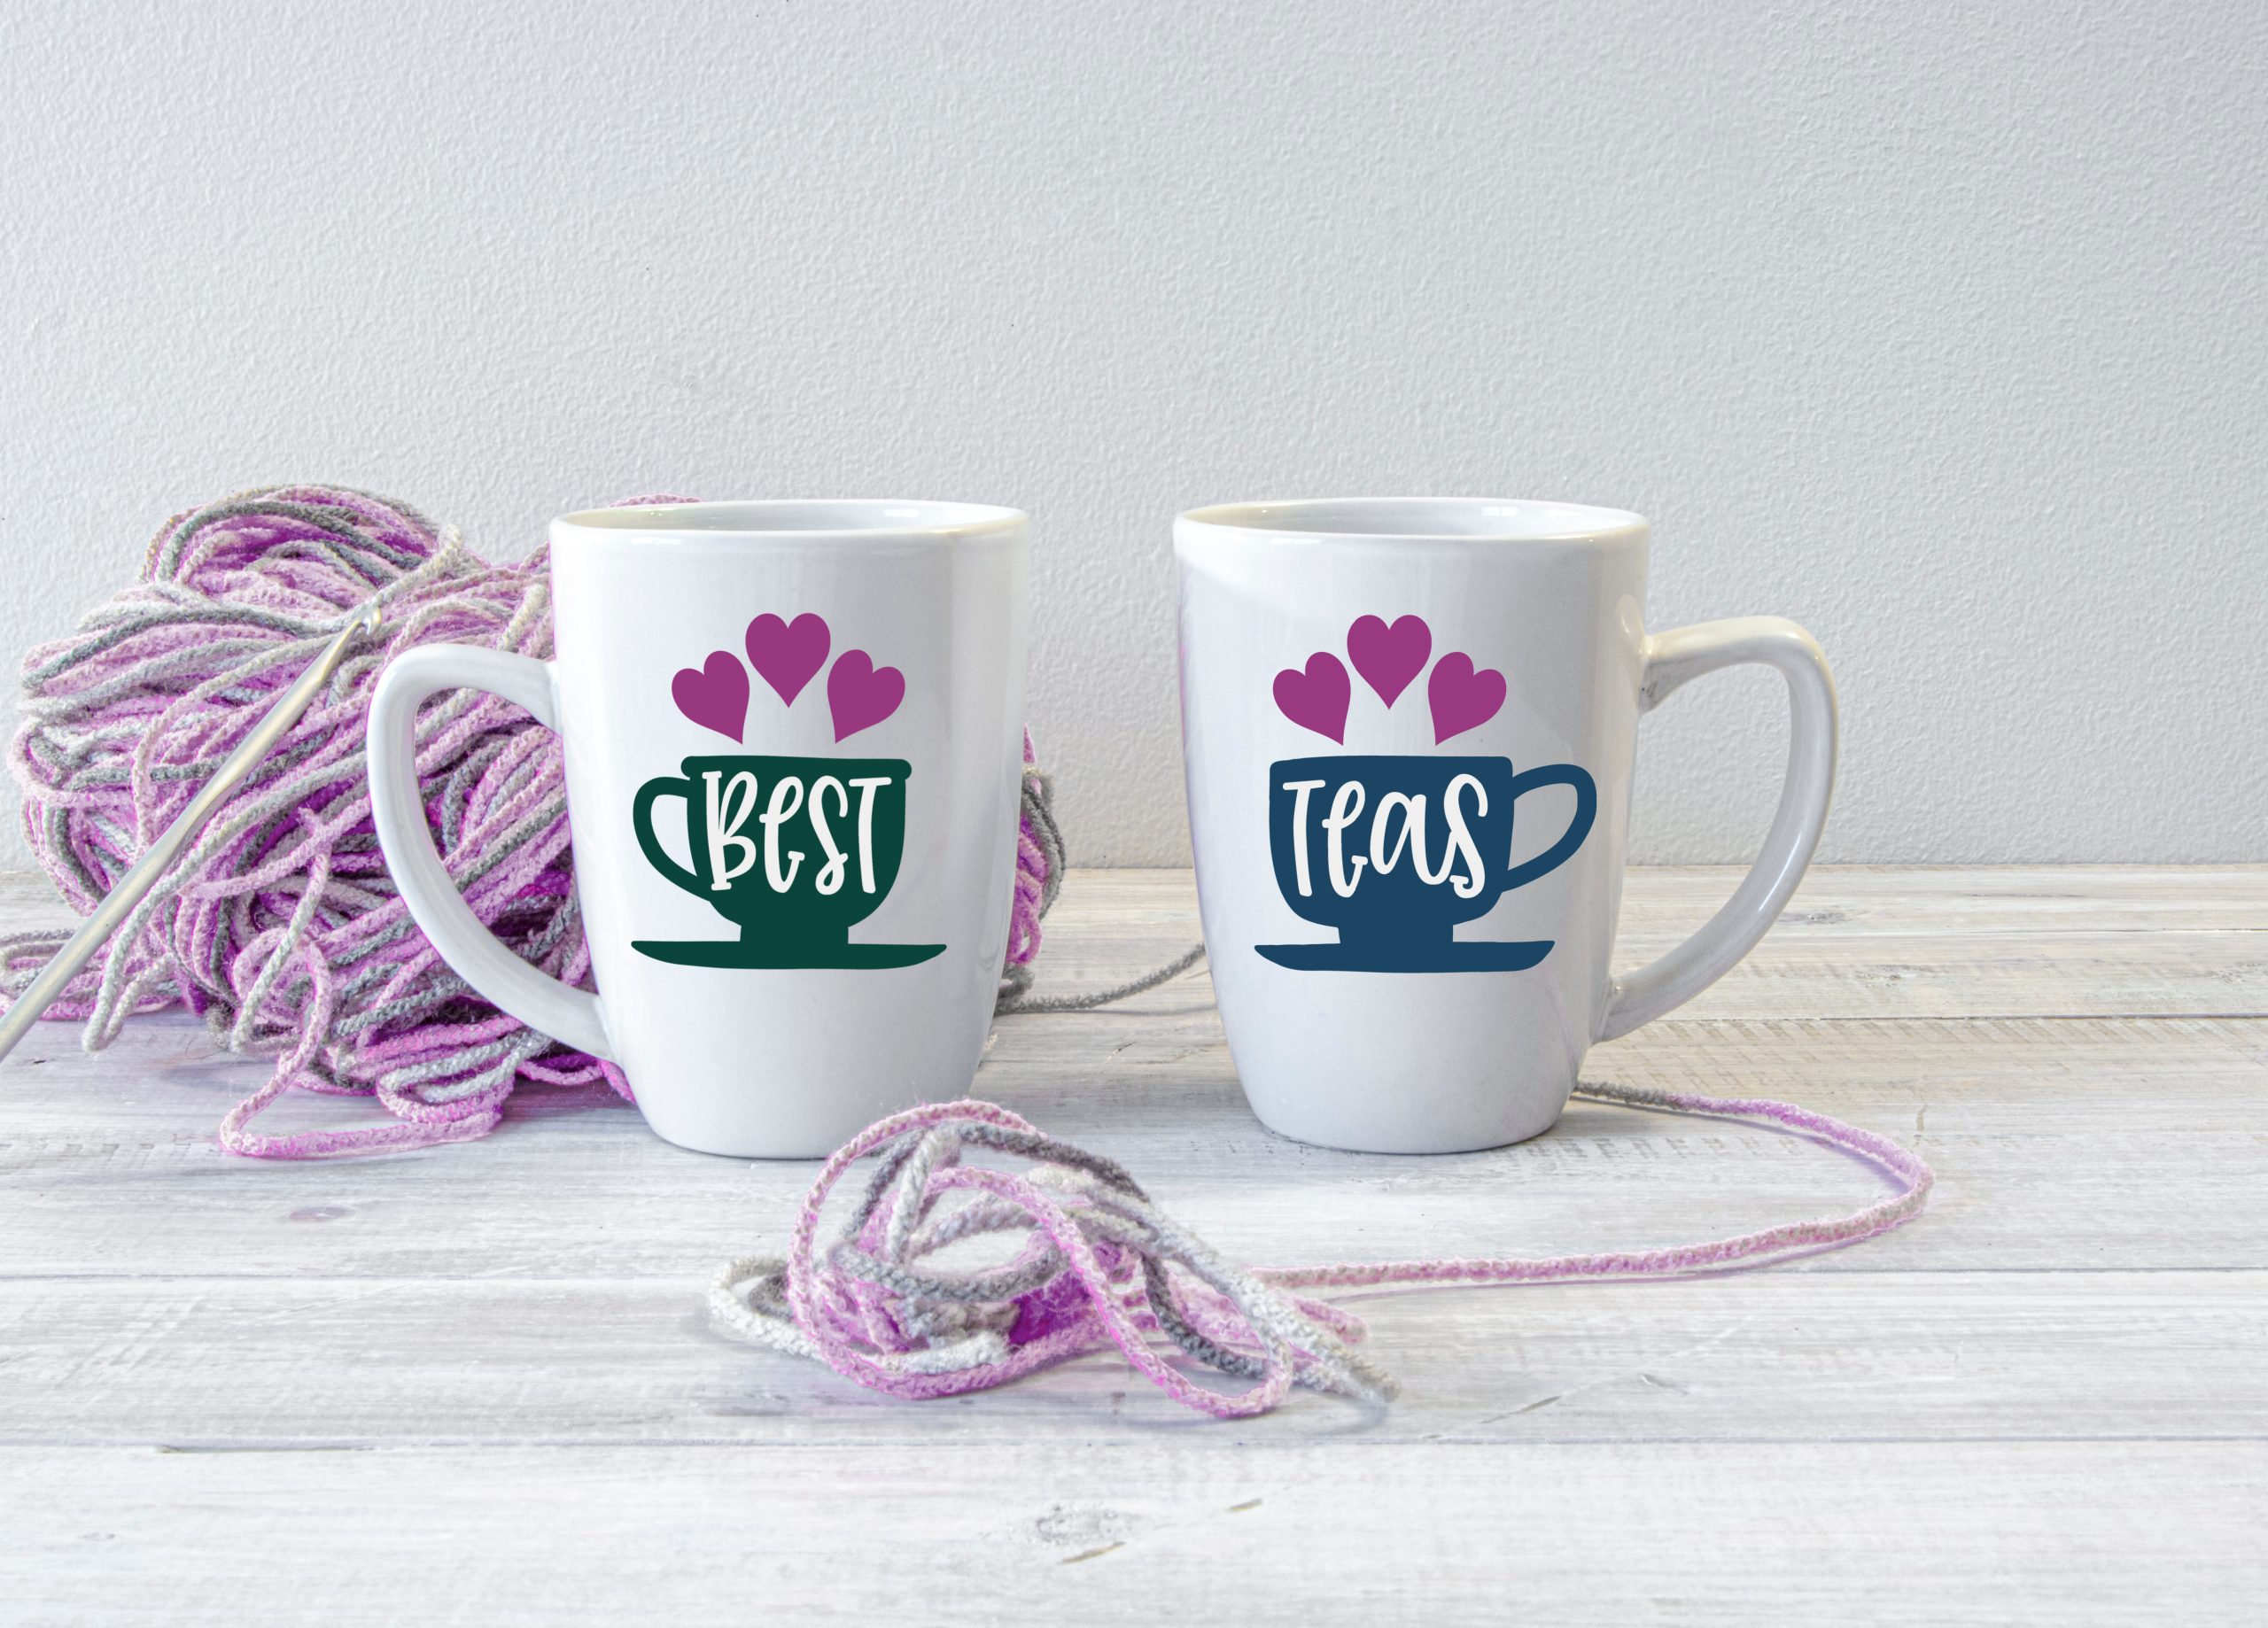 white mugs with Best and Teas designs near yarn